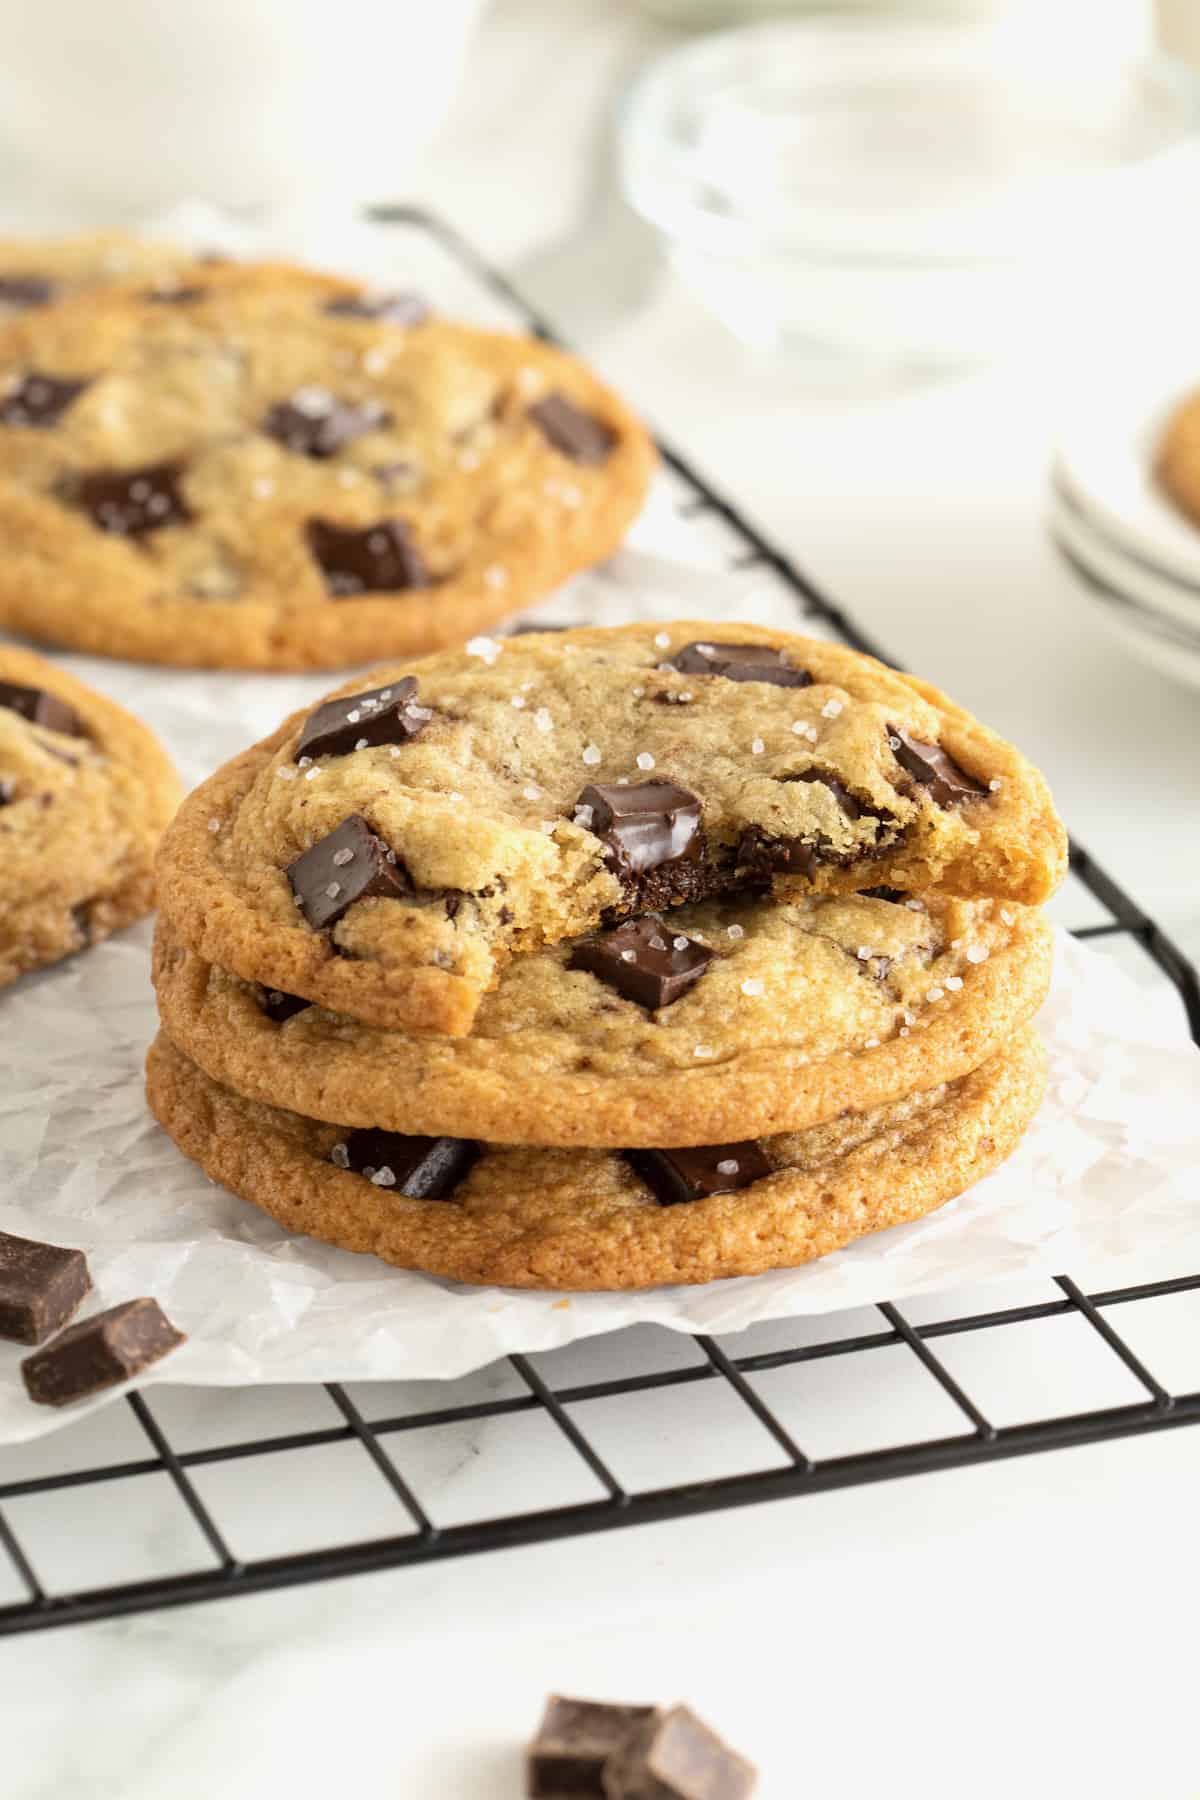 Three chocolate chunk cookies in a stack on a parchment lined cooling rack. The top cookie has a bite out of it.